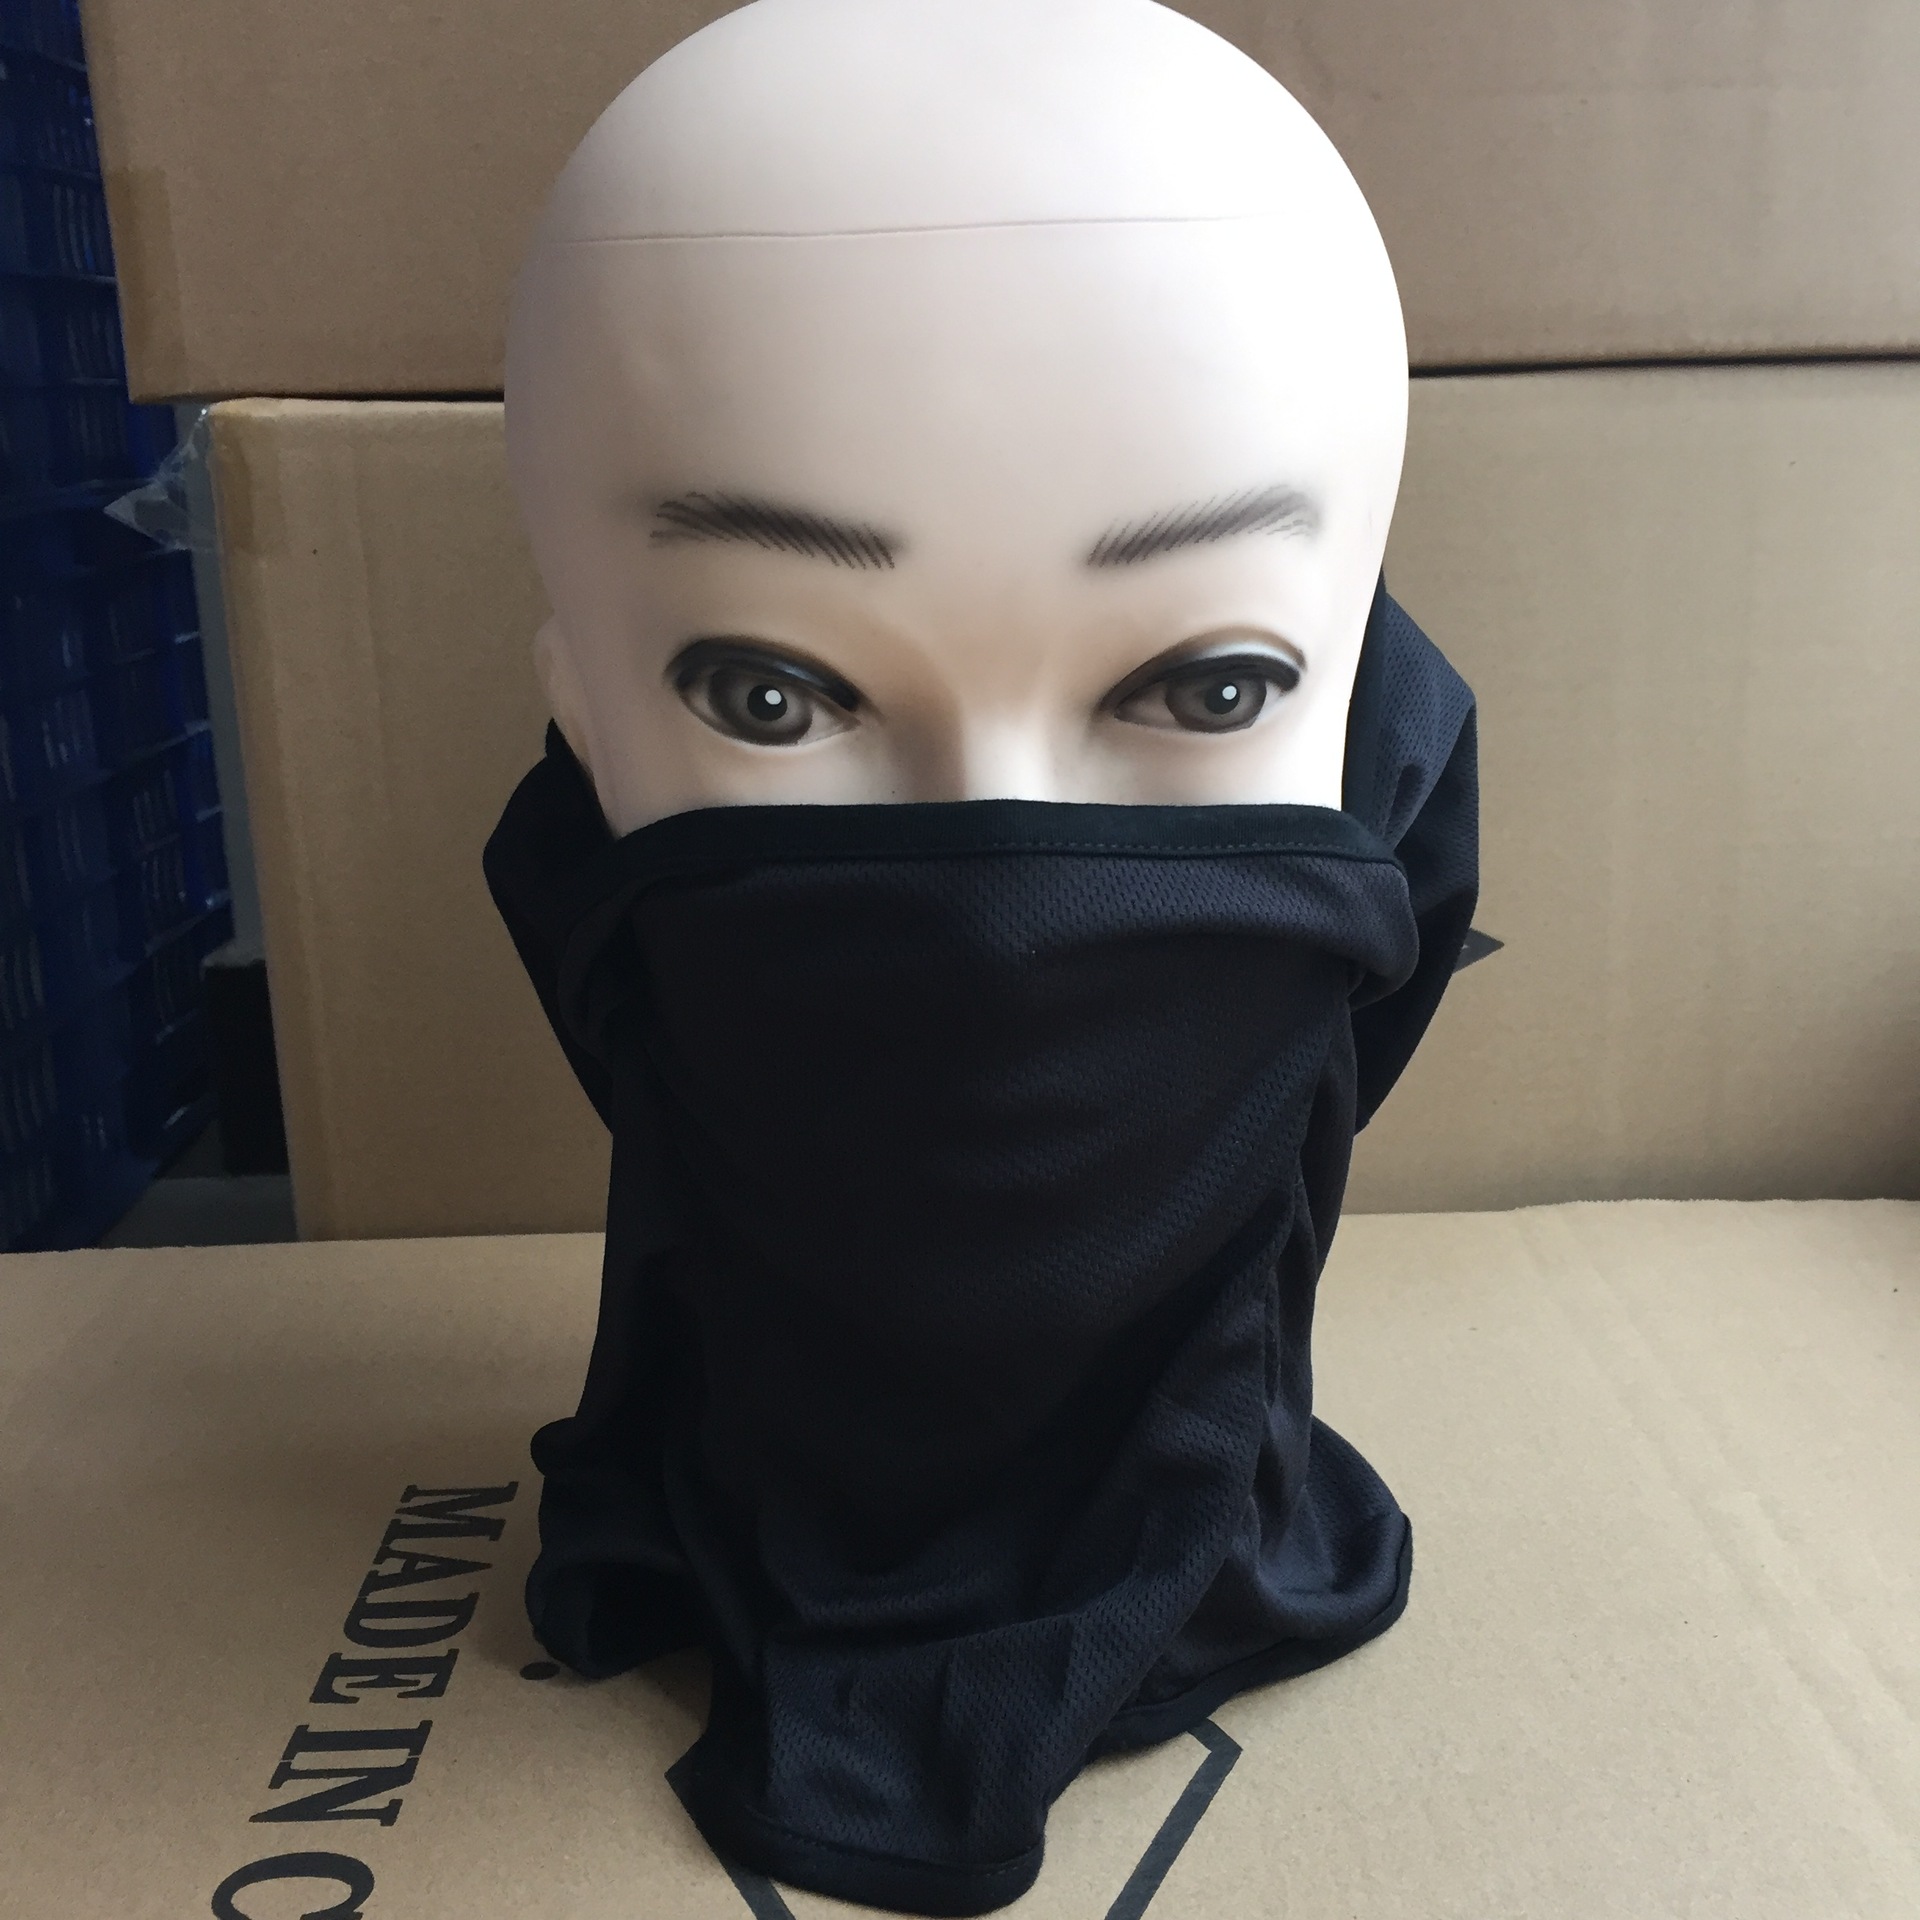 Ultimate-Thermal-Retention-Windproof-Ski-Tactical-Mask-Cold-Weather-Face-Mask-Neck-Warmer-1241597-6